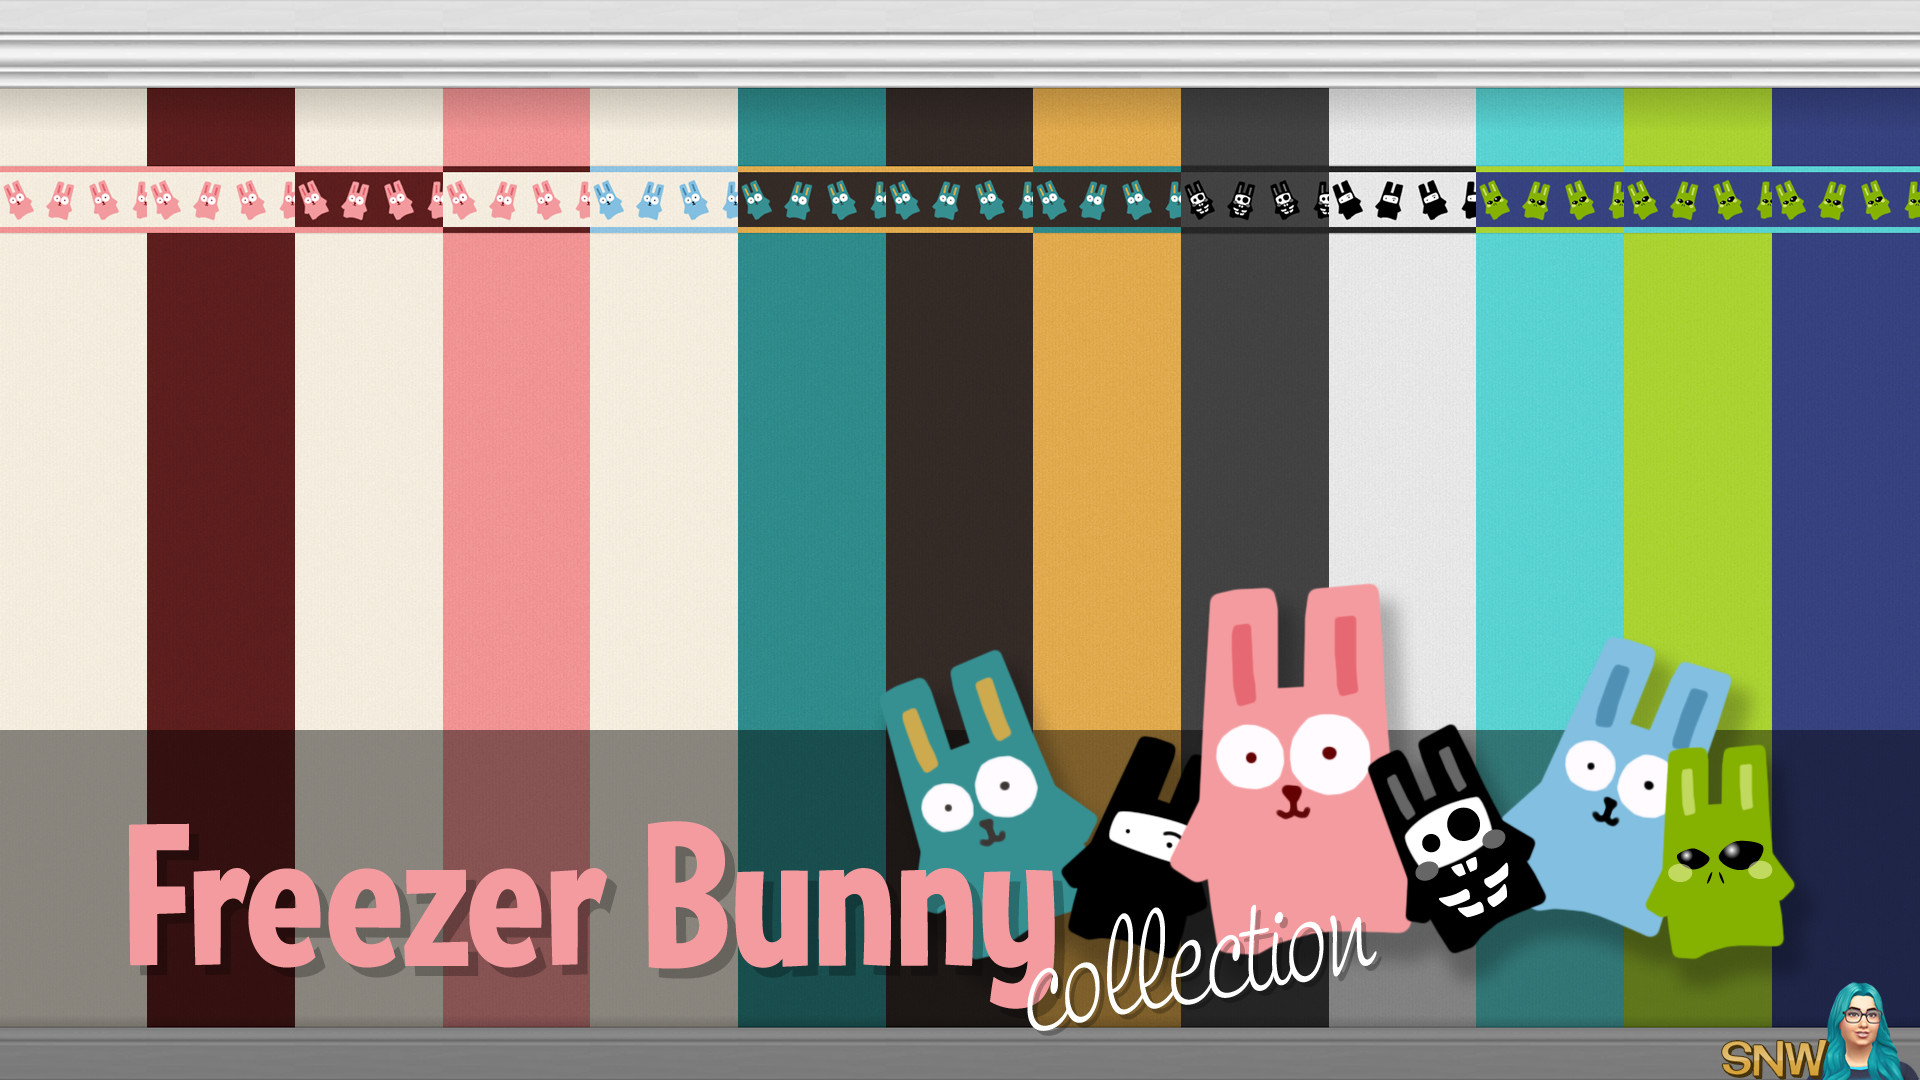 1920x1080 Freezer Bunny Collection: Top Border Wallpapers